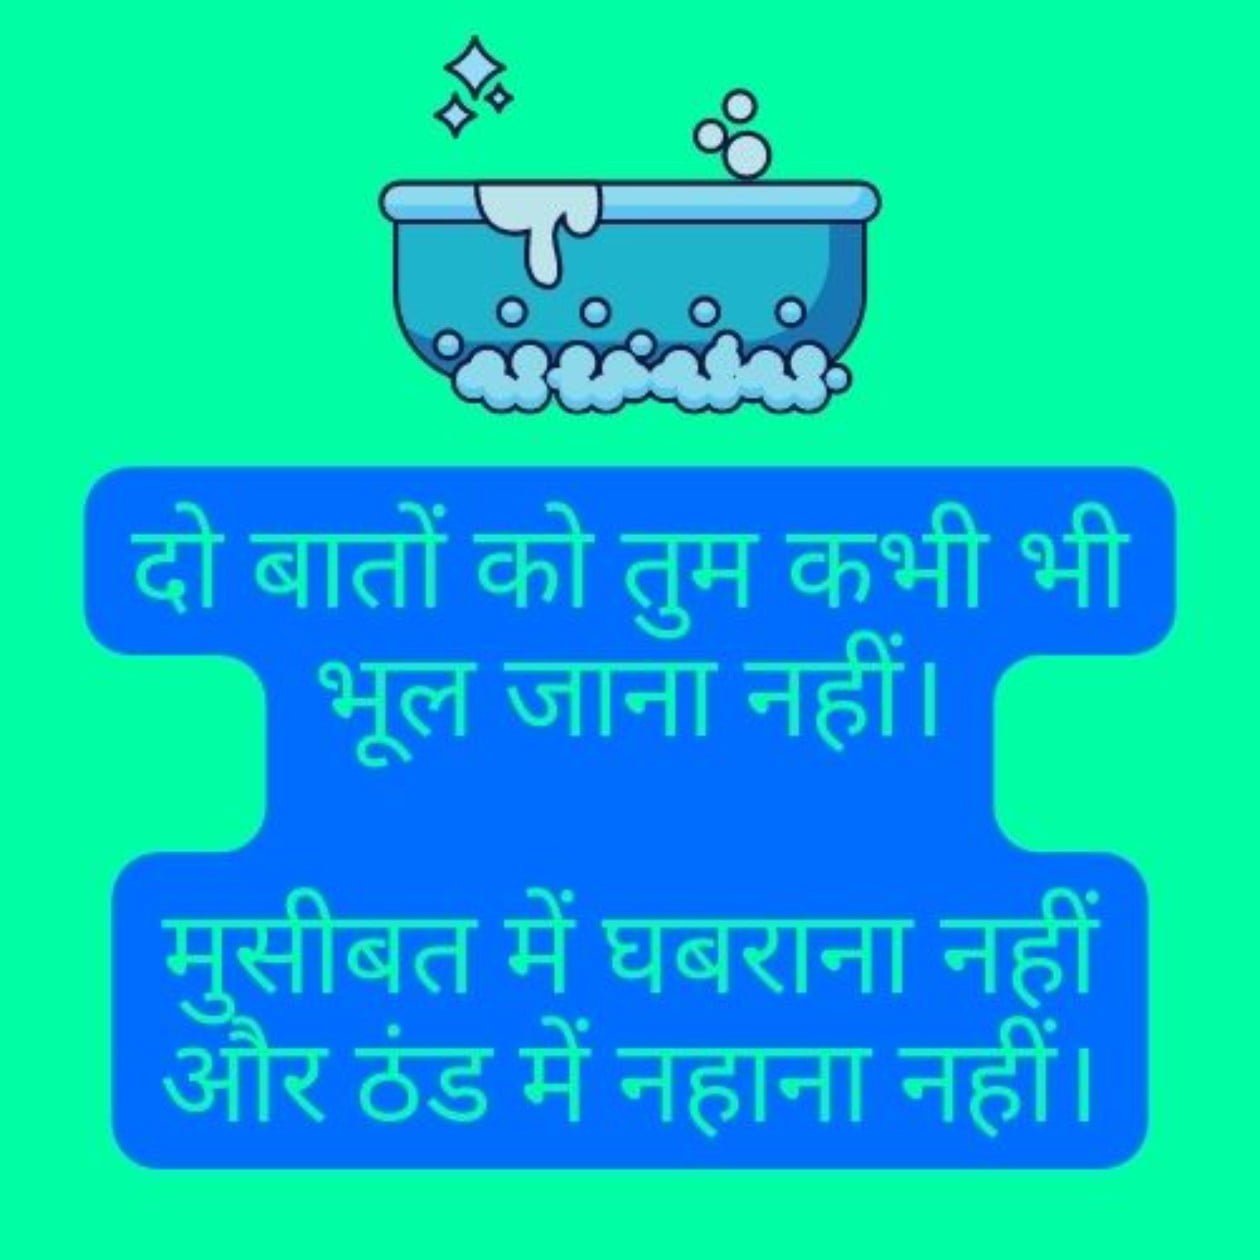 A bathtub animation and funny text in Hindi about not panicking in trouble. New Majedar Chutkule